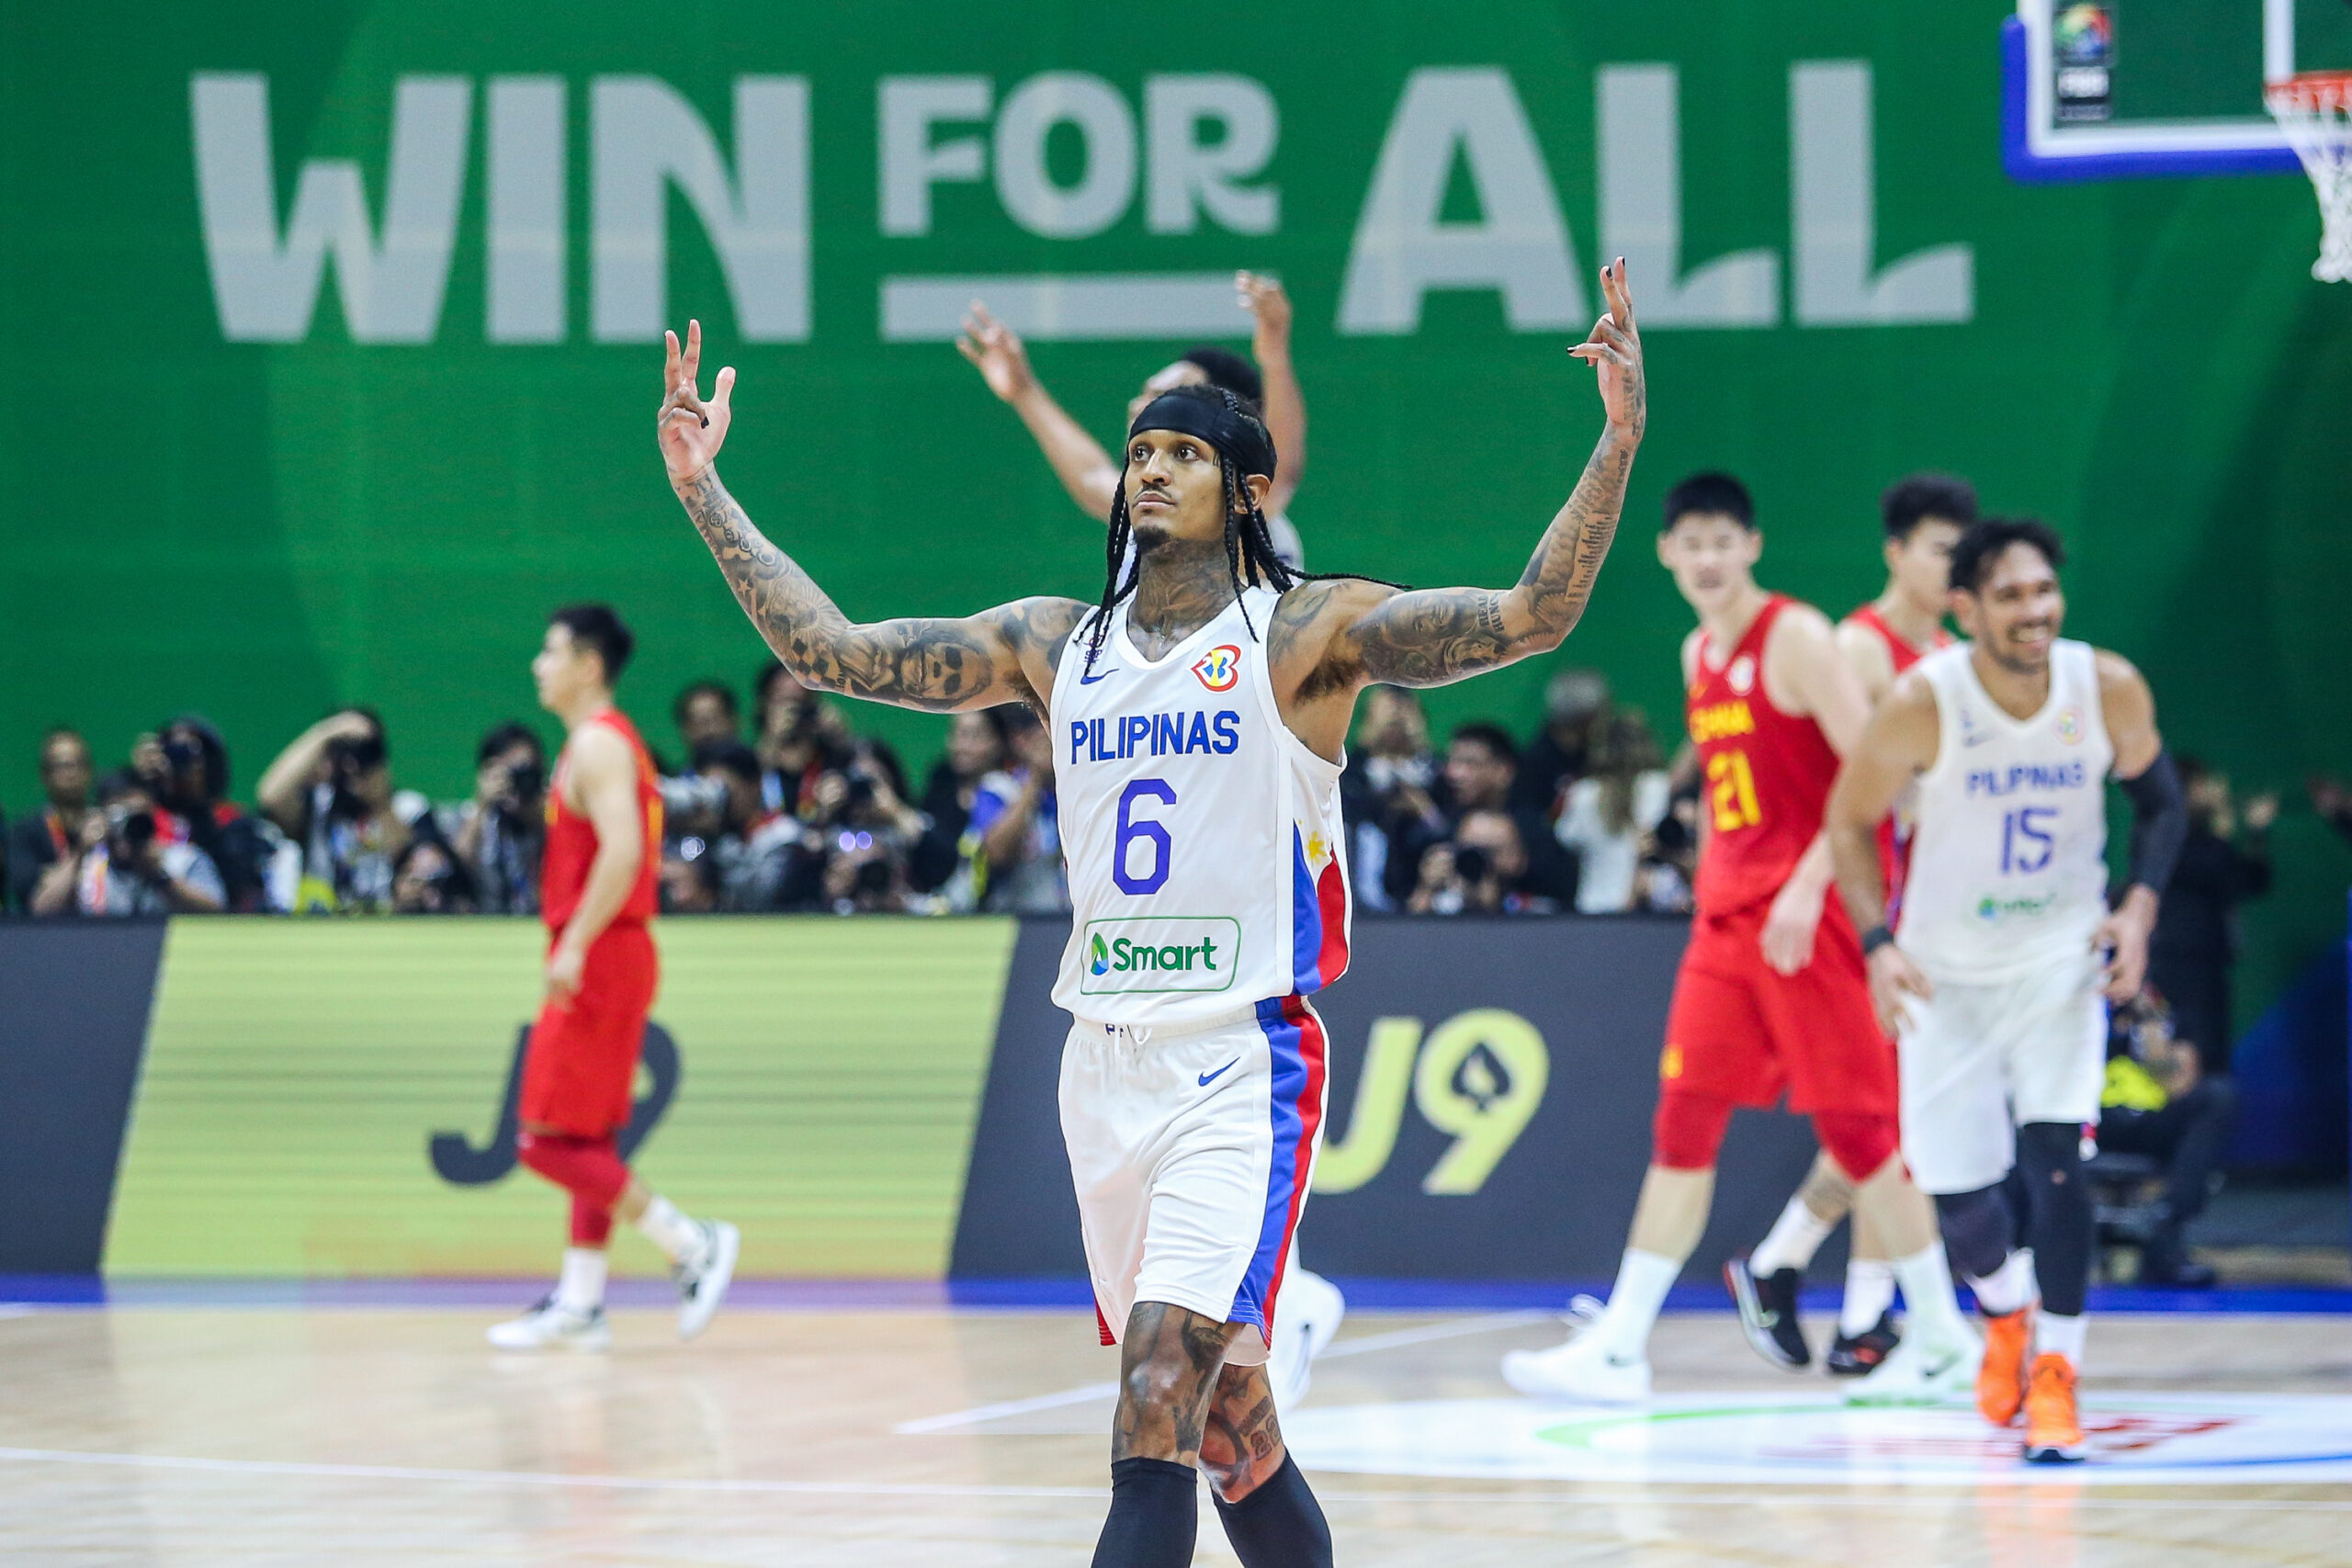 Jordan Clarkson leads as Gilas beats China, ends Fiba World Cup with